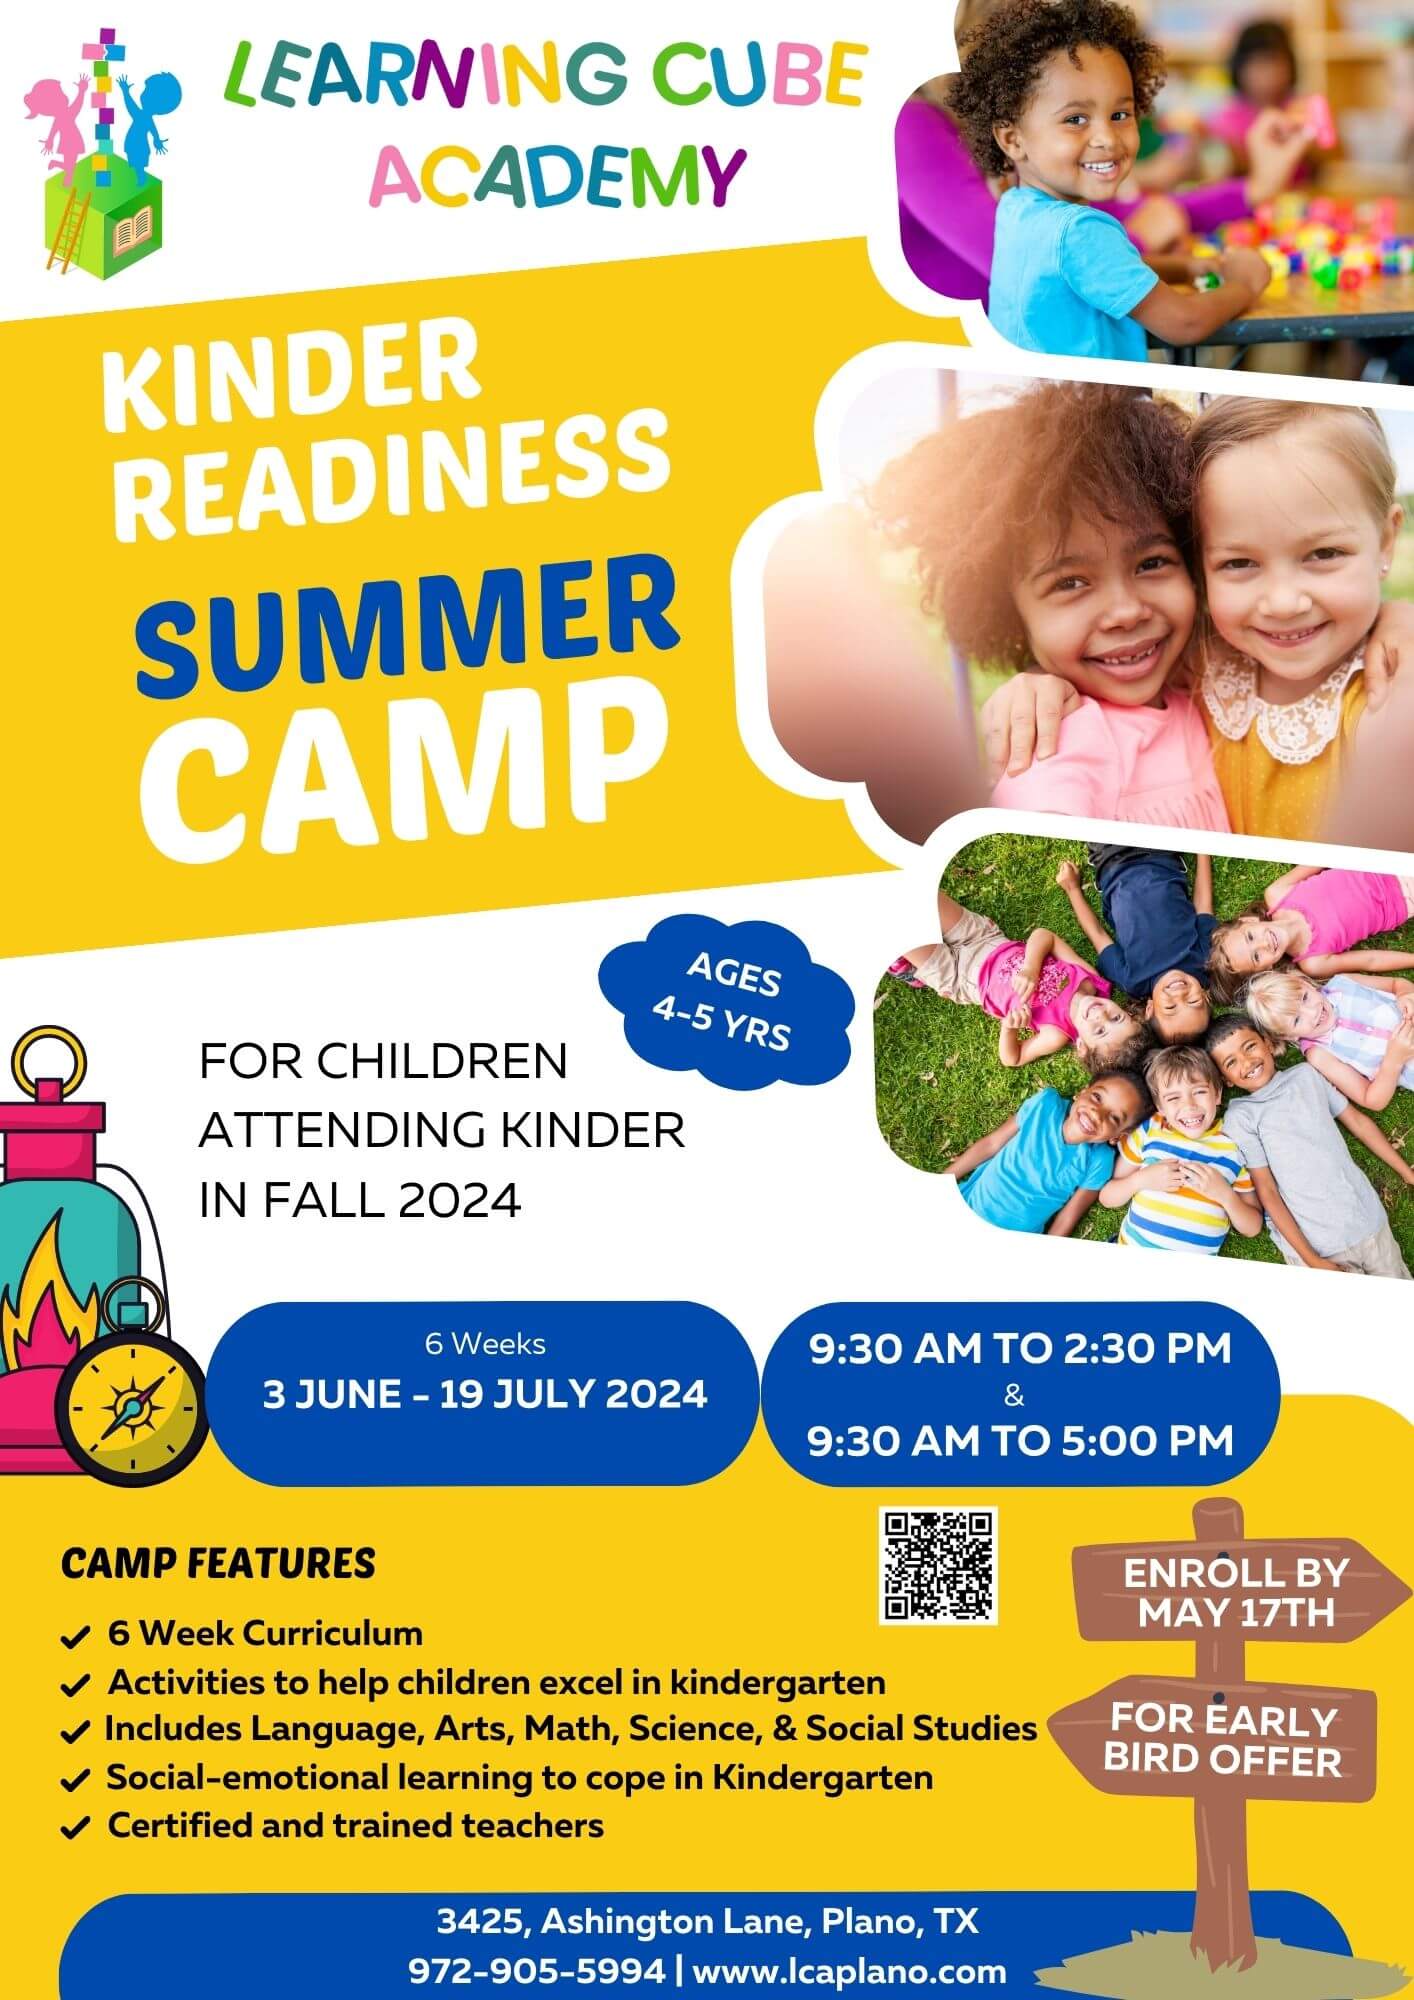 LCA-Best-Summer-Camps-in-Plano-Frisco-Kinder-Readiness